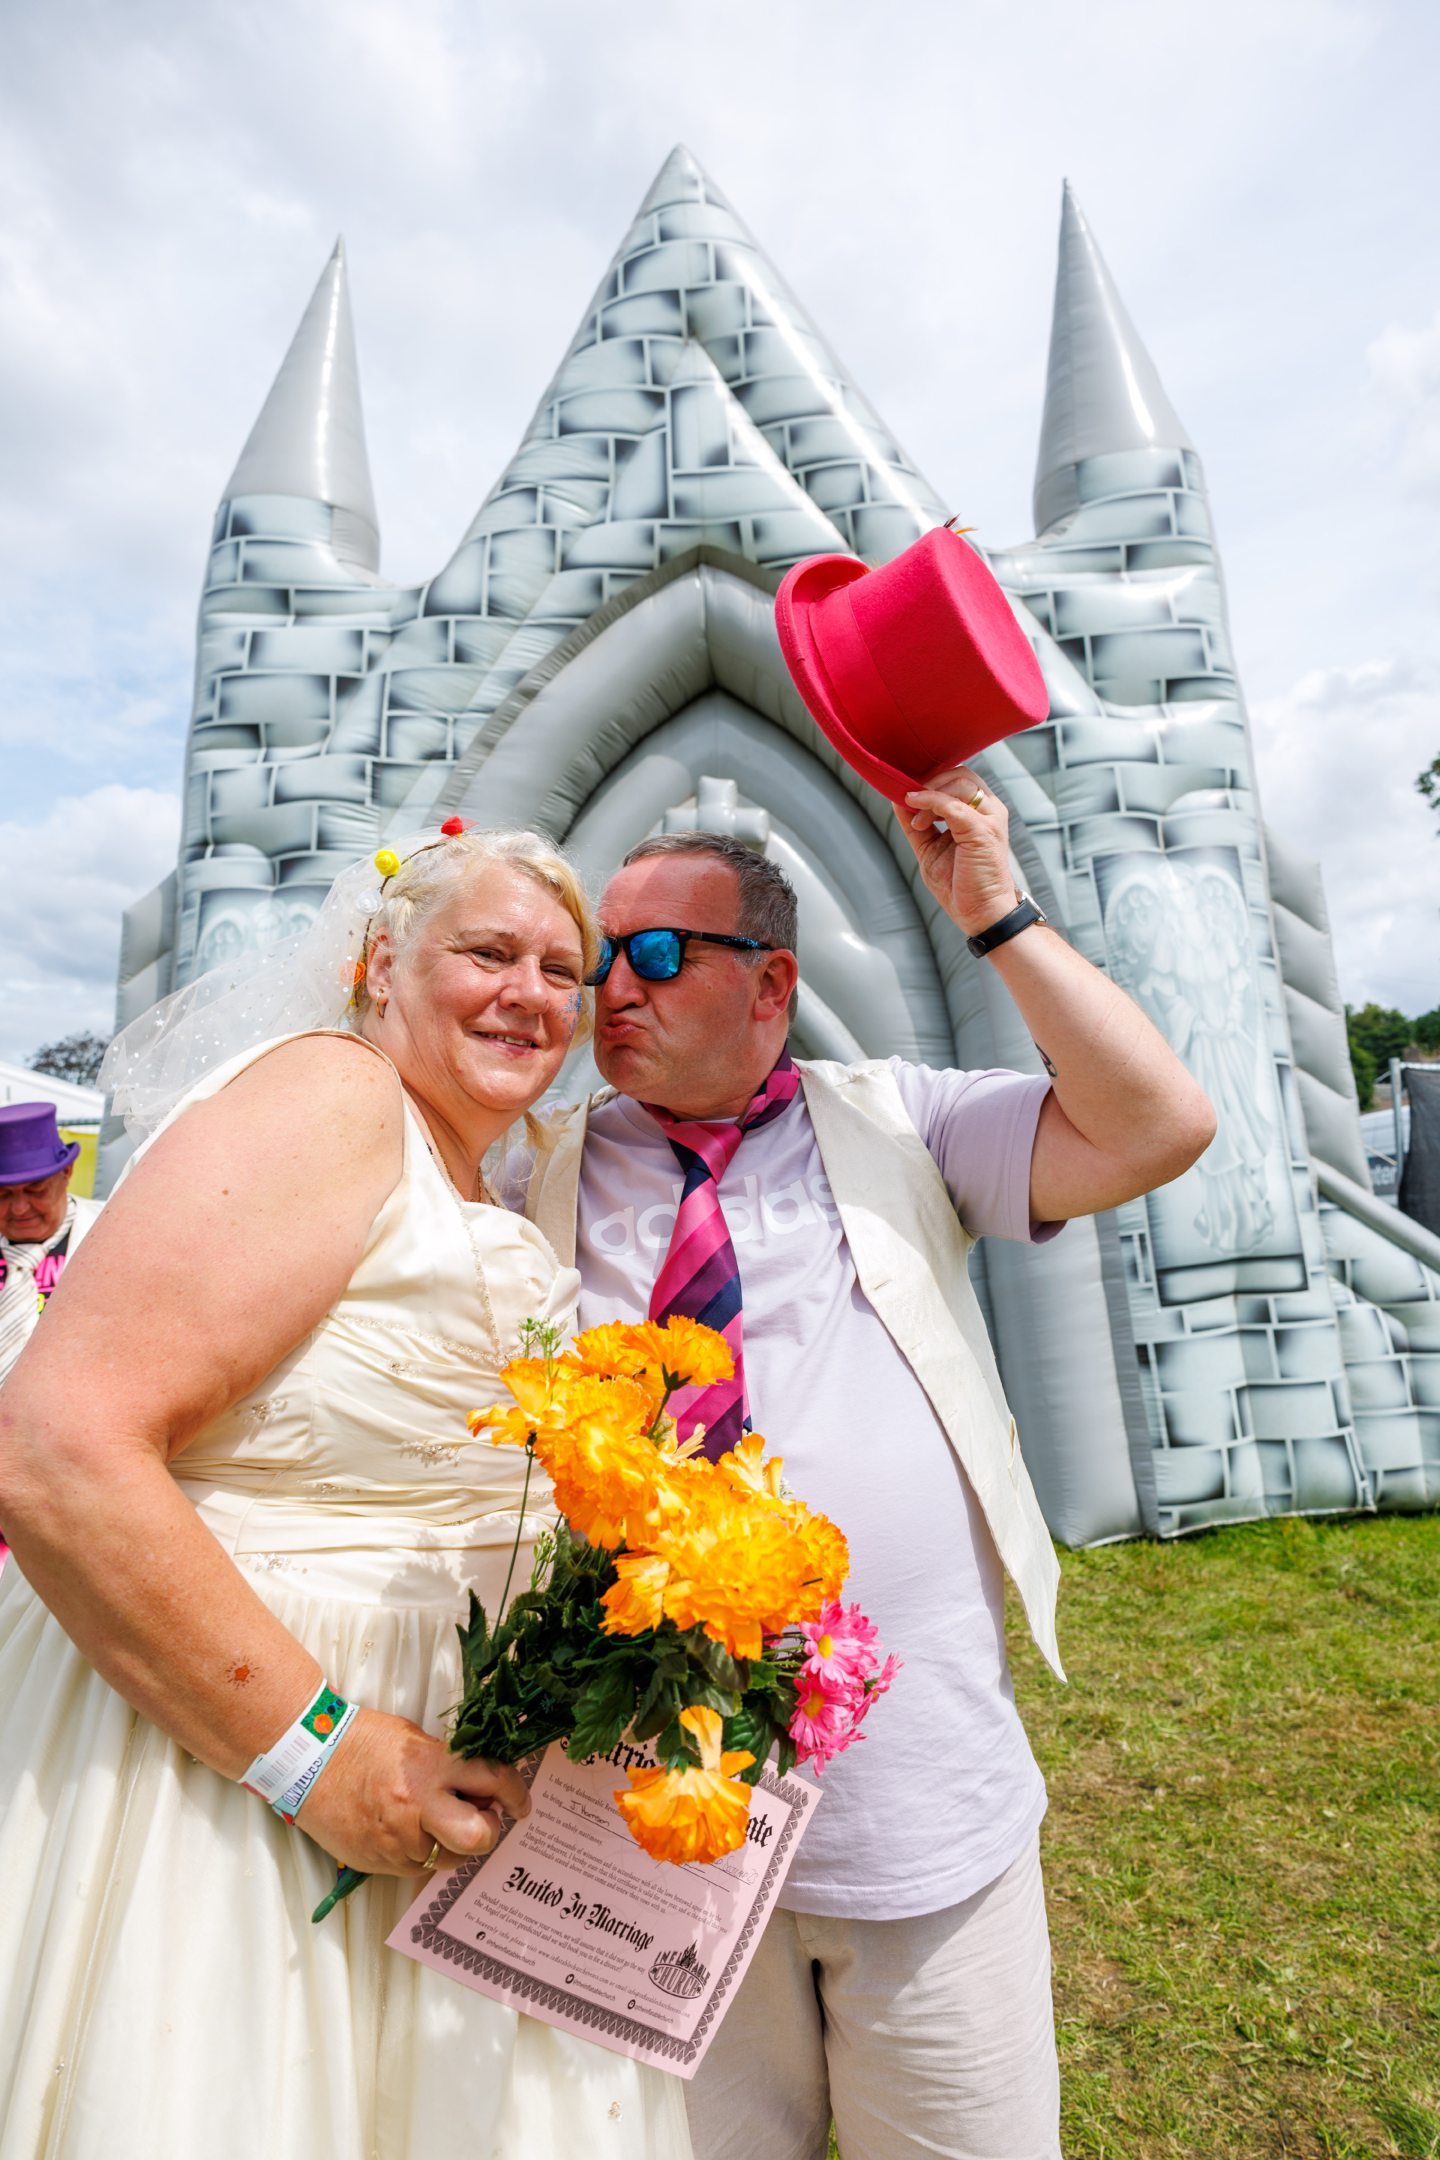 John and Joan Harrison renewed their wedding vows in an inflatable church during Rewind Scotland 2023.